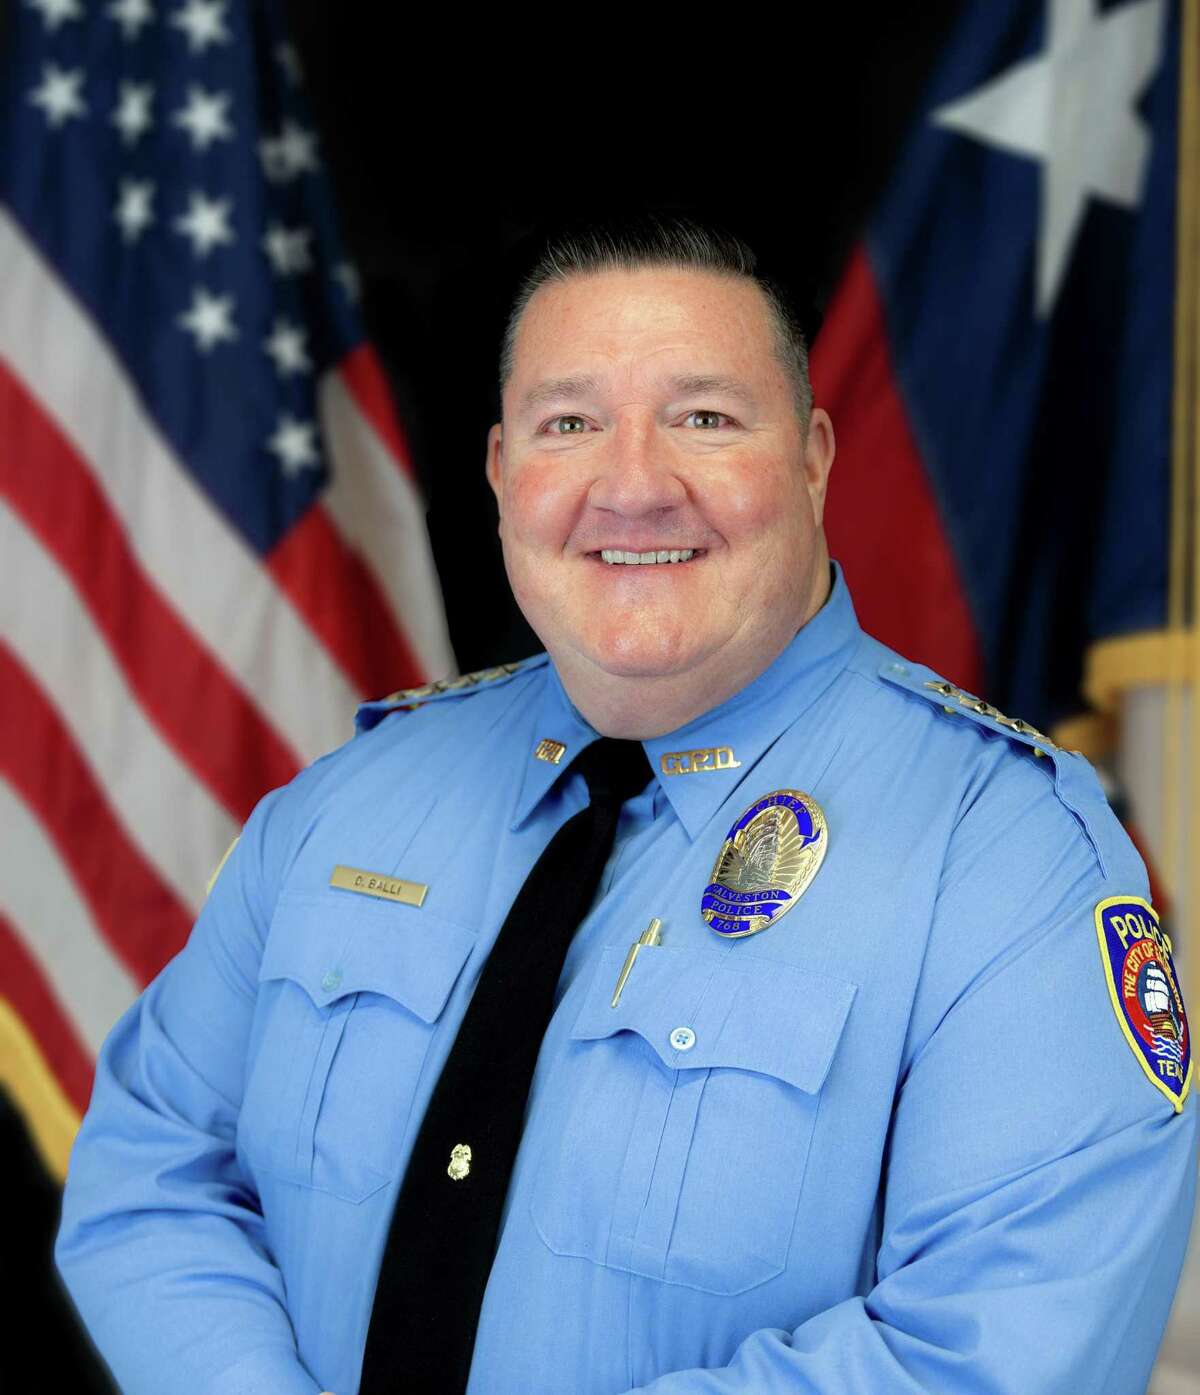 Galveston police chief Doug Balli has been placed on administrative leave while an internal investigation is conducted following a controversial home raid.